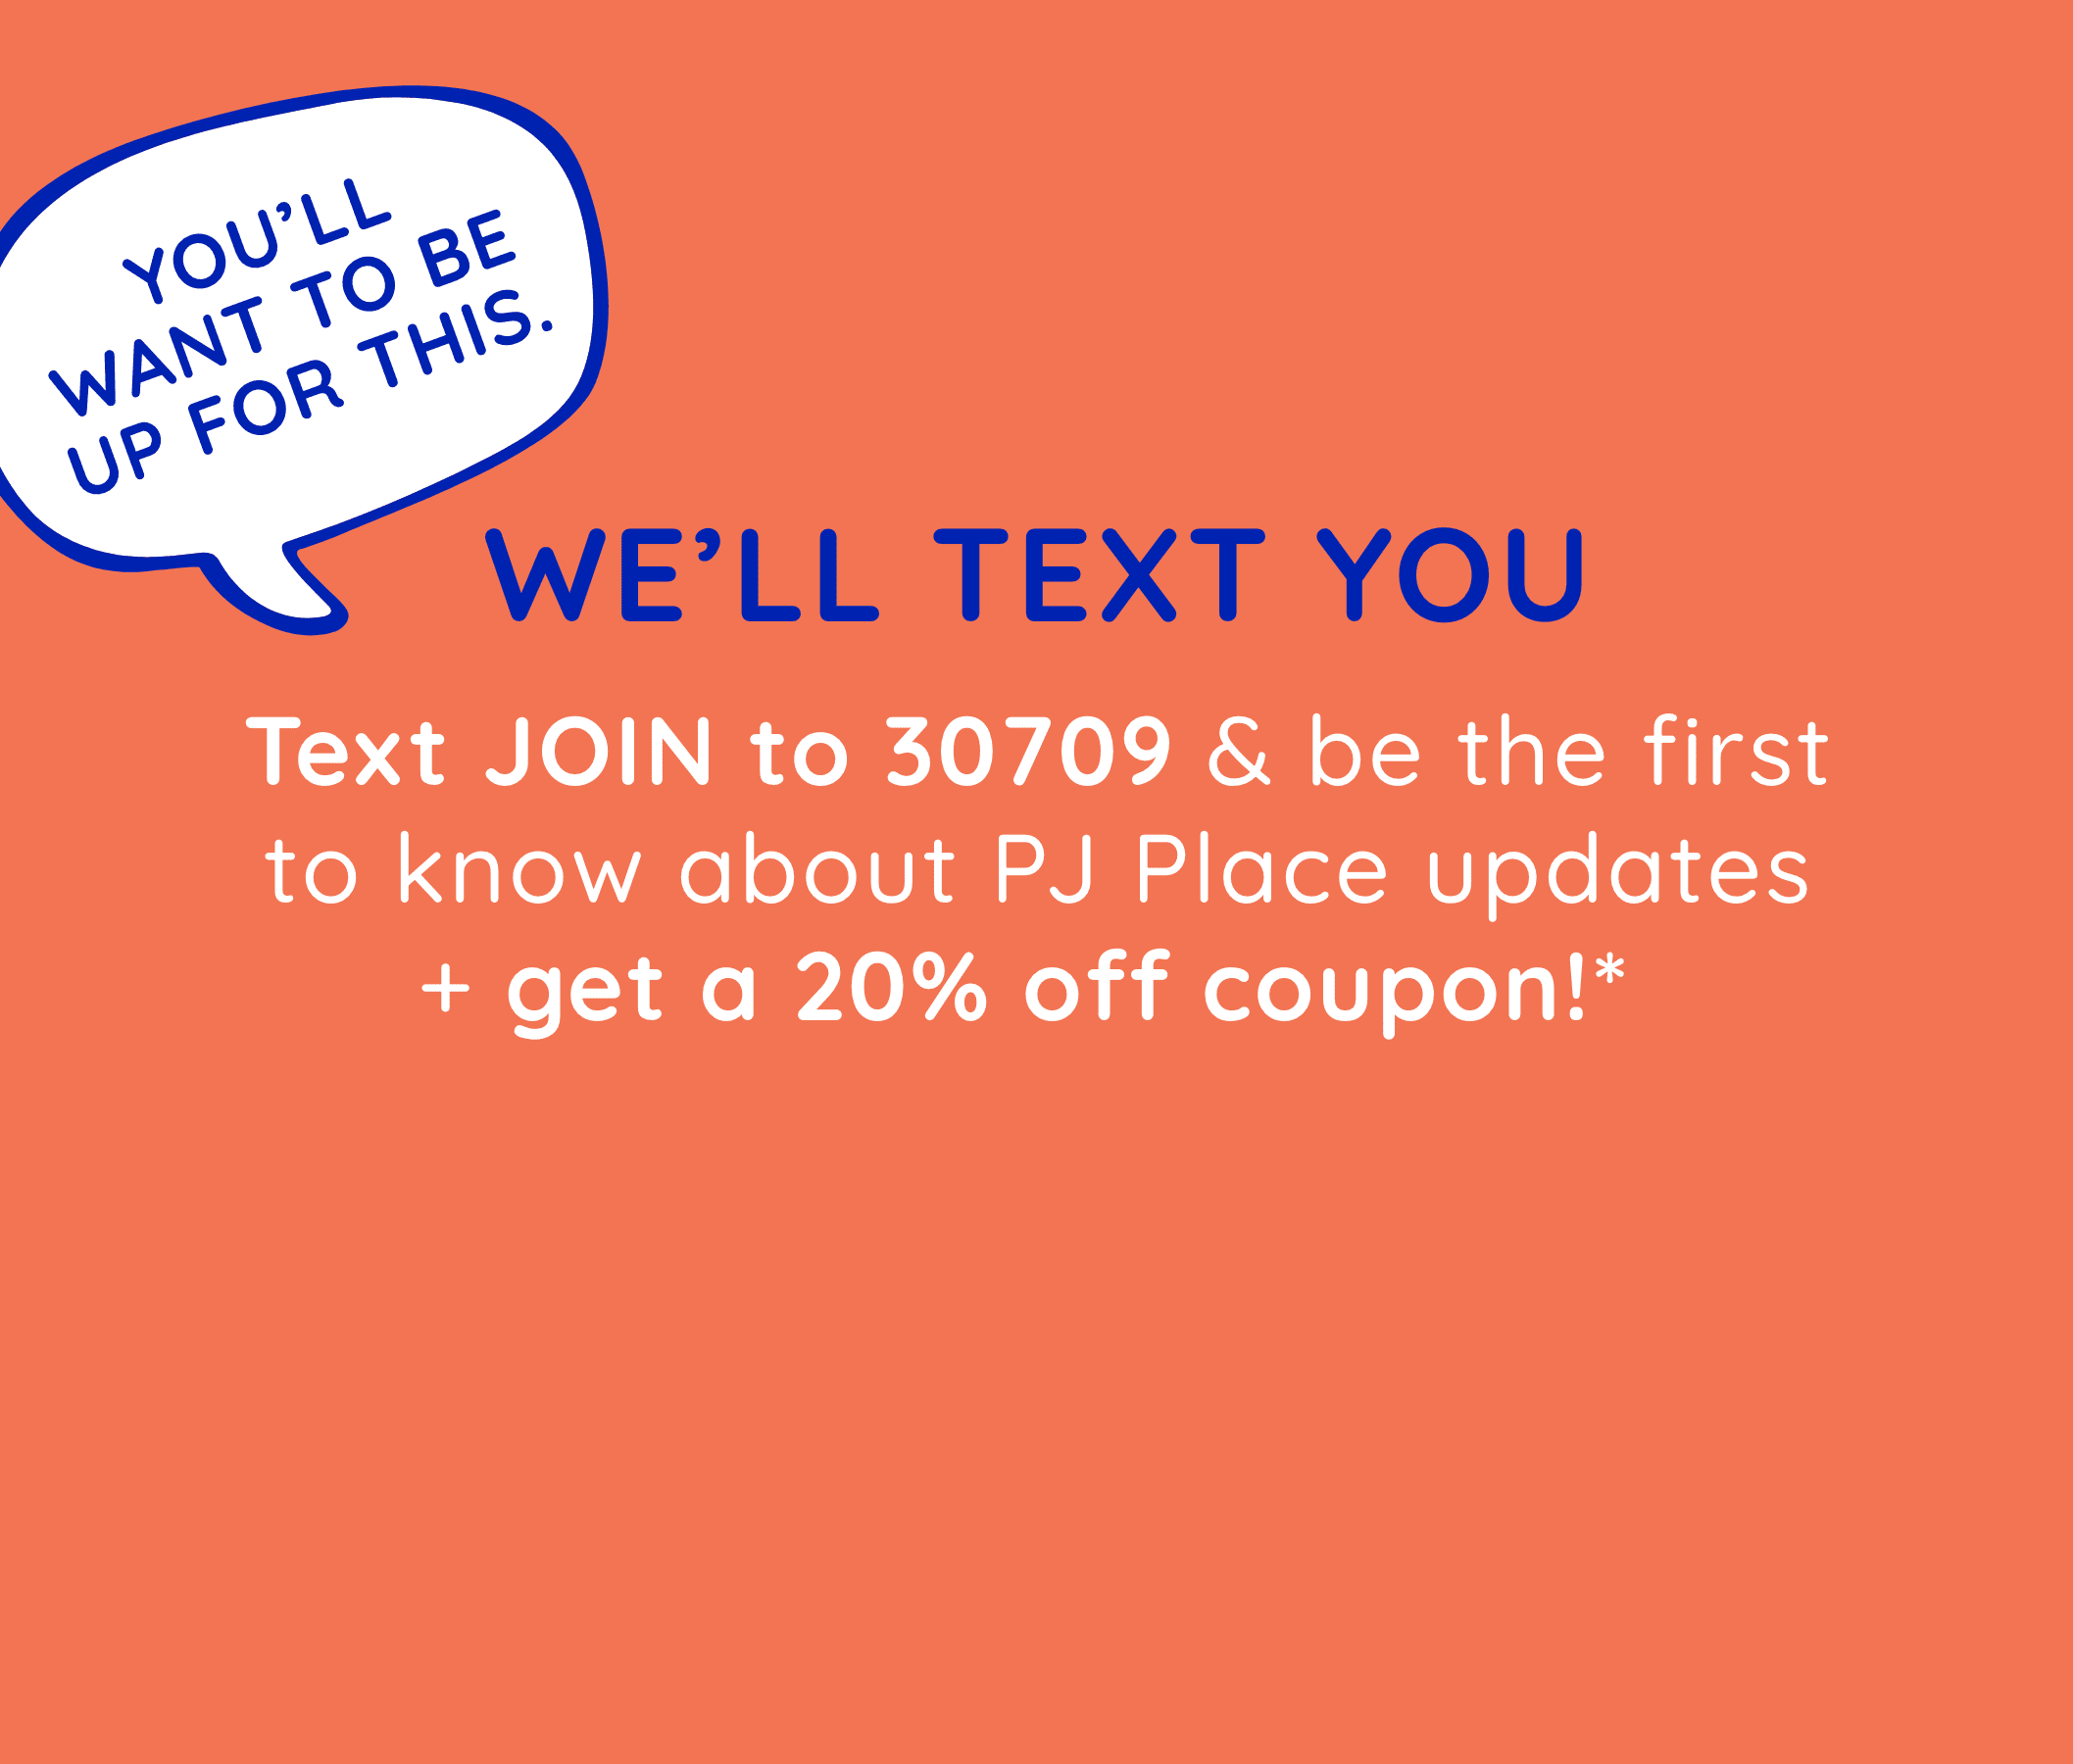 Text JOIN to 30709 to be the first to know about PJ Place updates + get a 20% off coupon!  